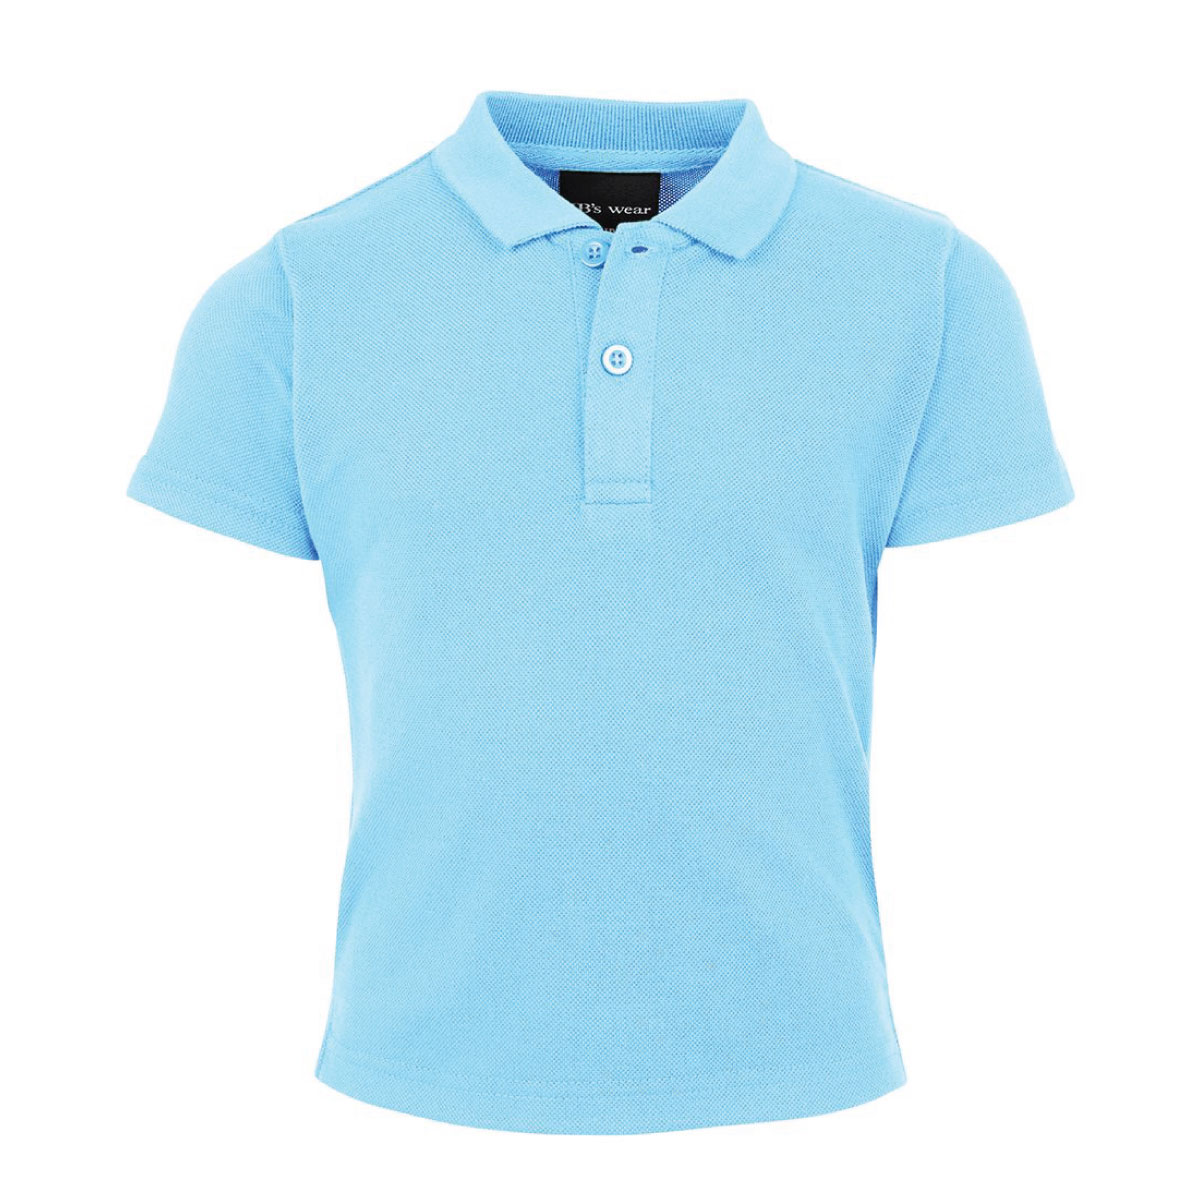 Promotional Infant Polo Shirts | Promotion Products